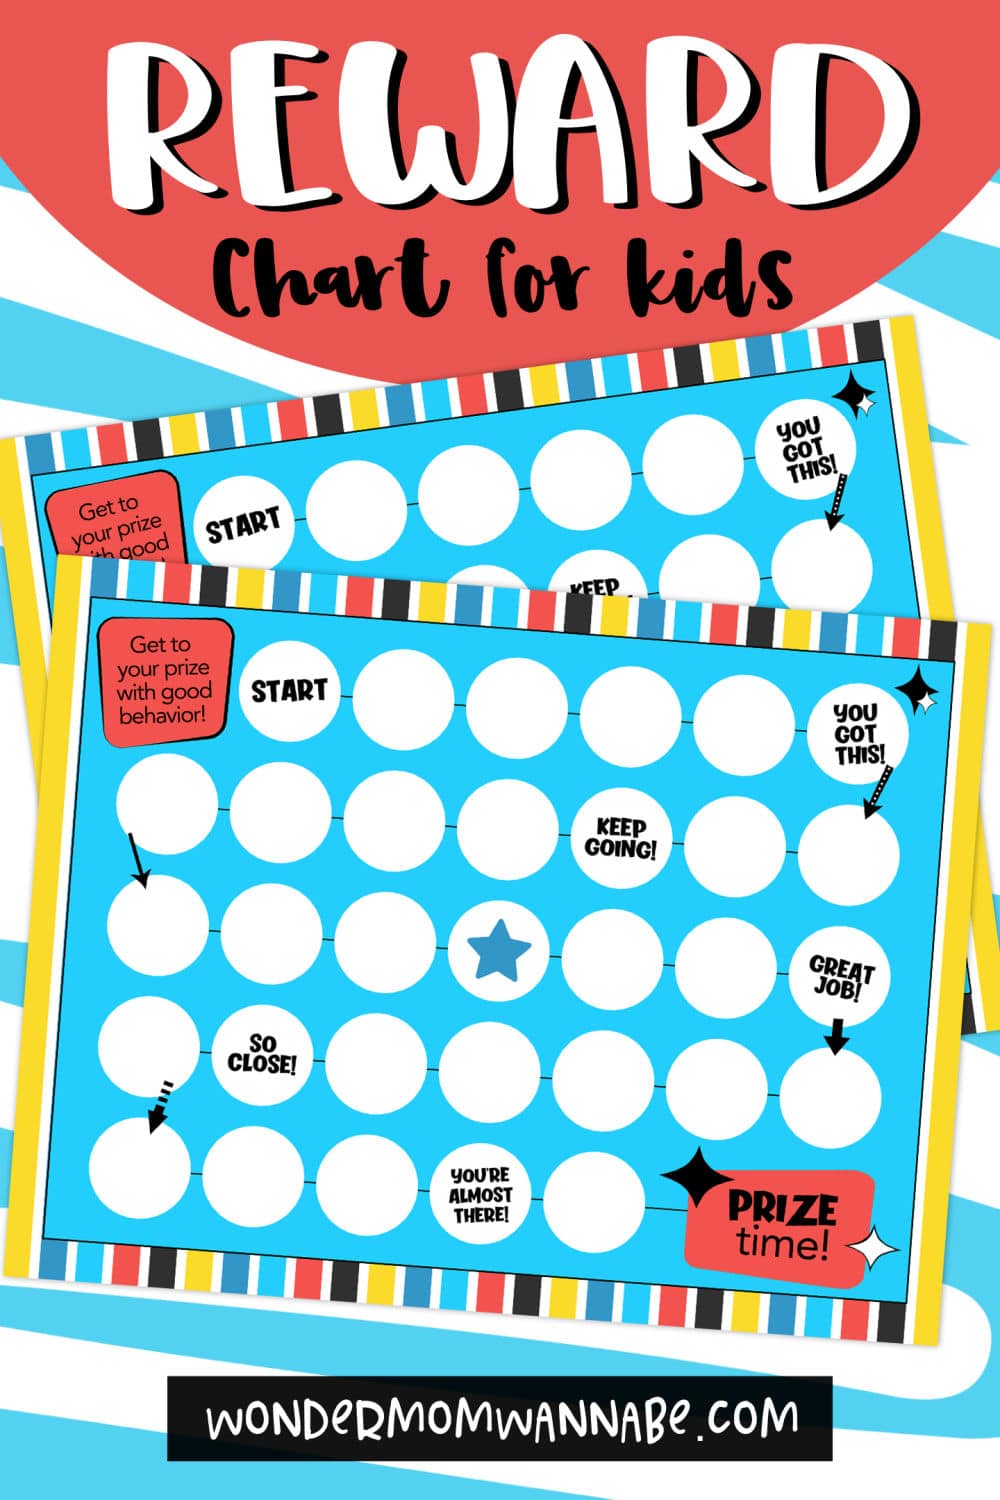 This printable reward chart for kids can be used in many ways and is a great tool to help kids improve behavior and reach goals. #printables #rewardcharts #printablesforkids via @wondermomwannab